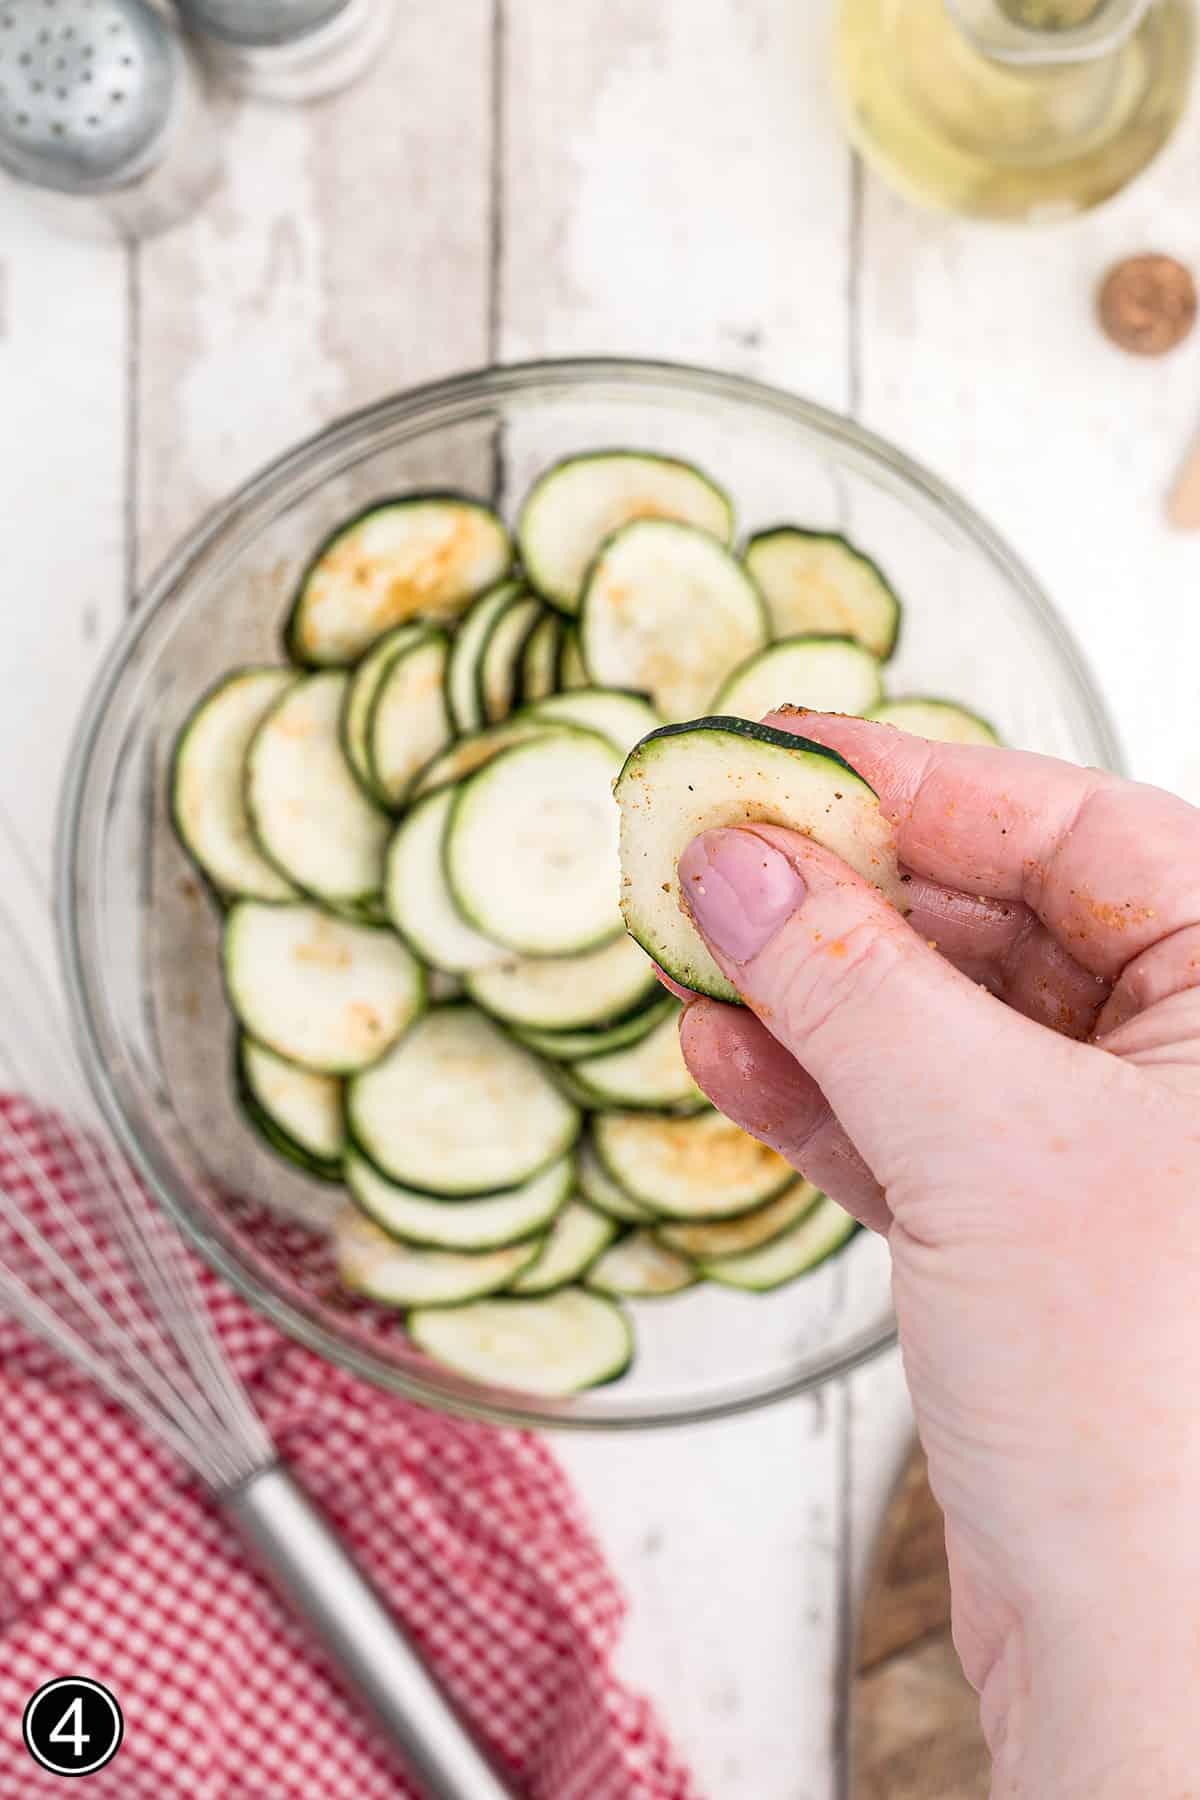 Tossing zucchini chips with oil and spices.